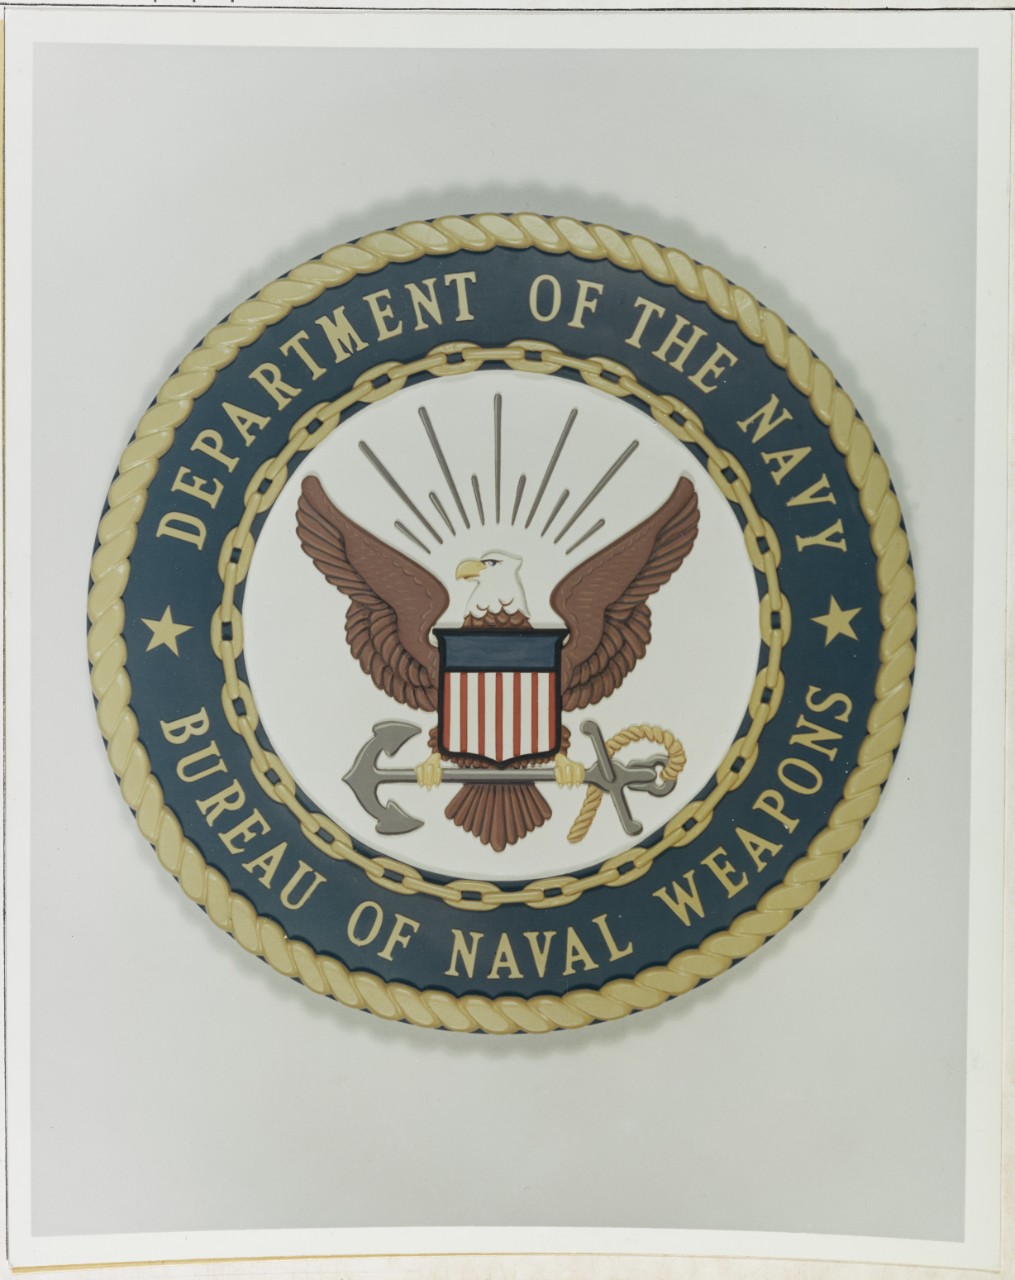 Seal of the U.S. Department of the Navy Bureau of Naval Weapons, circa 1960.